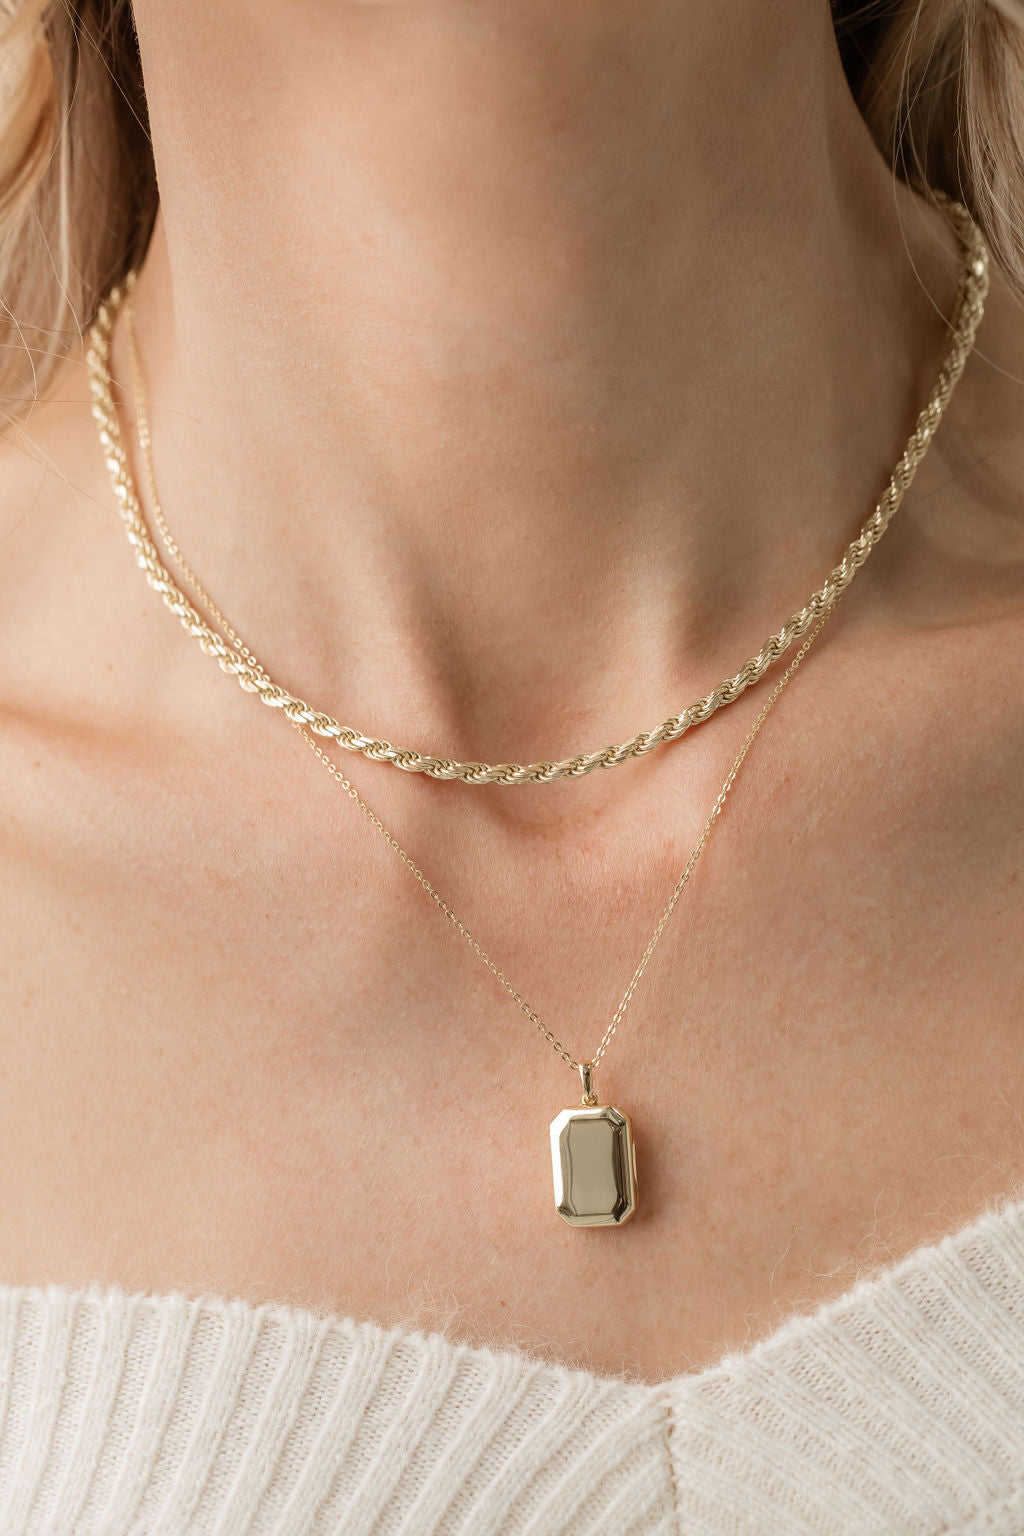 rectangular bevel locket necklace with a rope chain